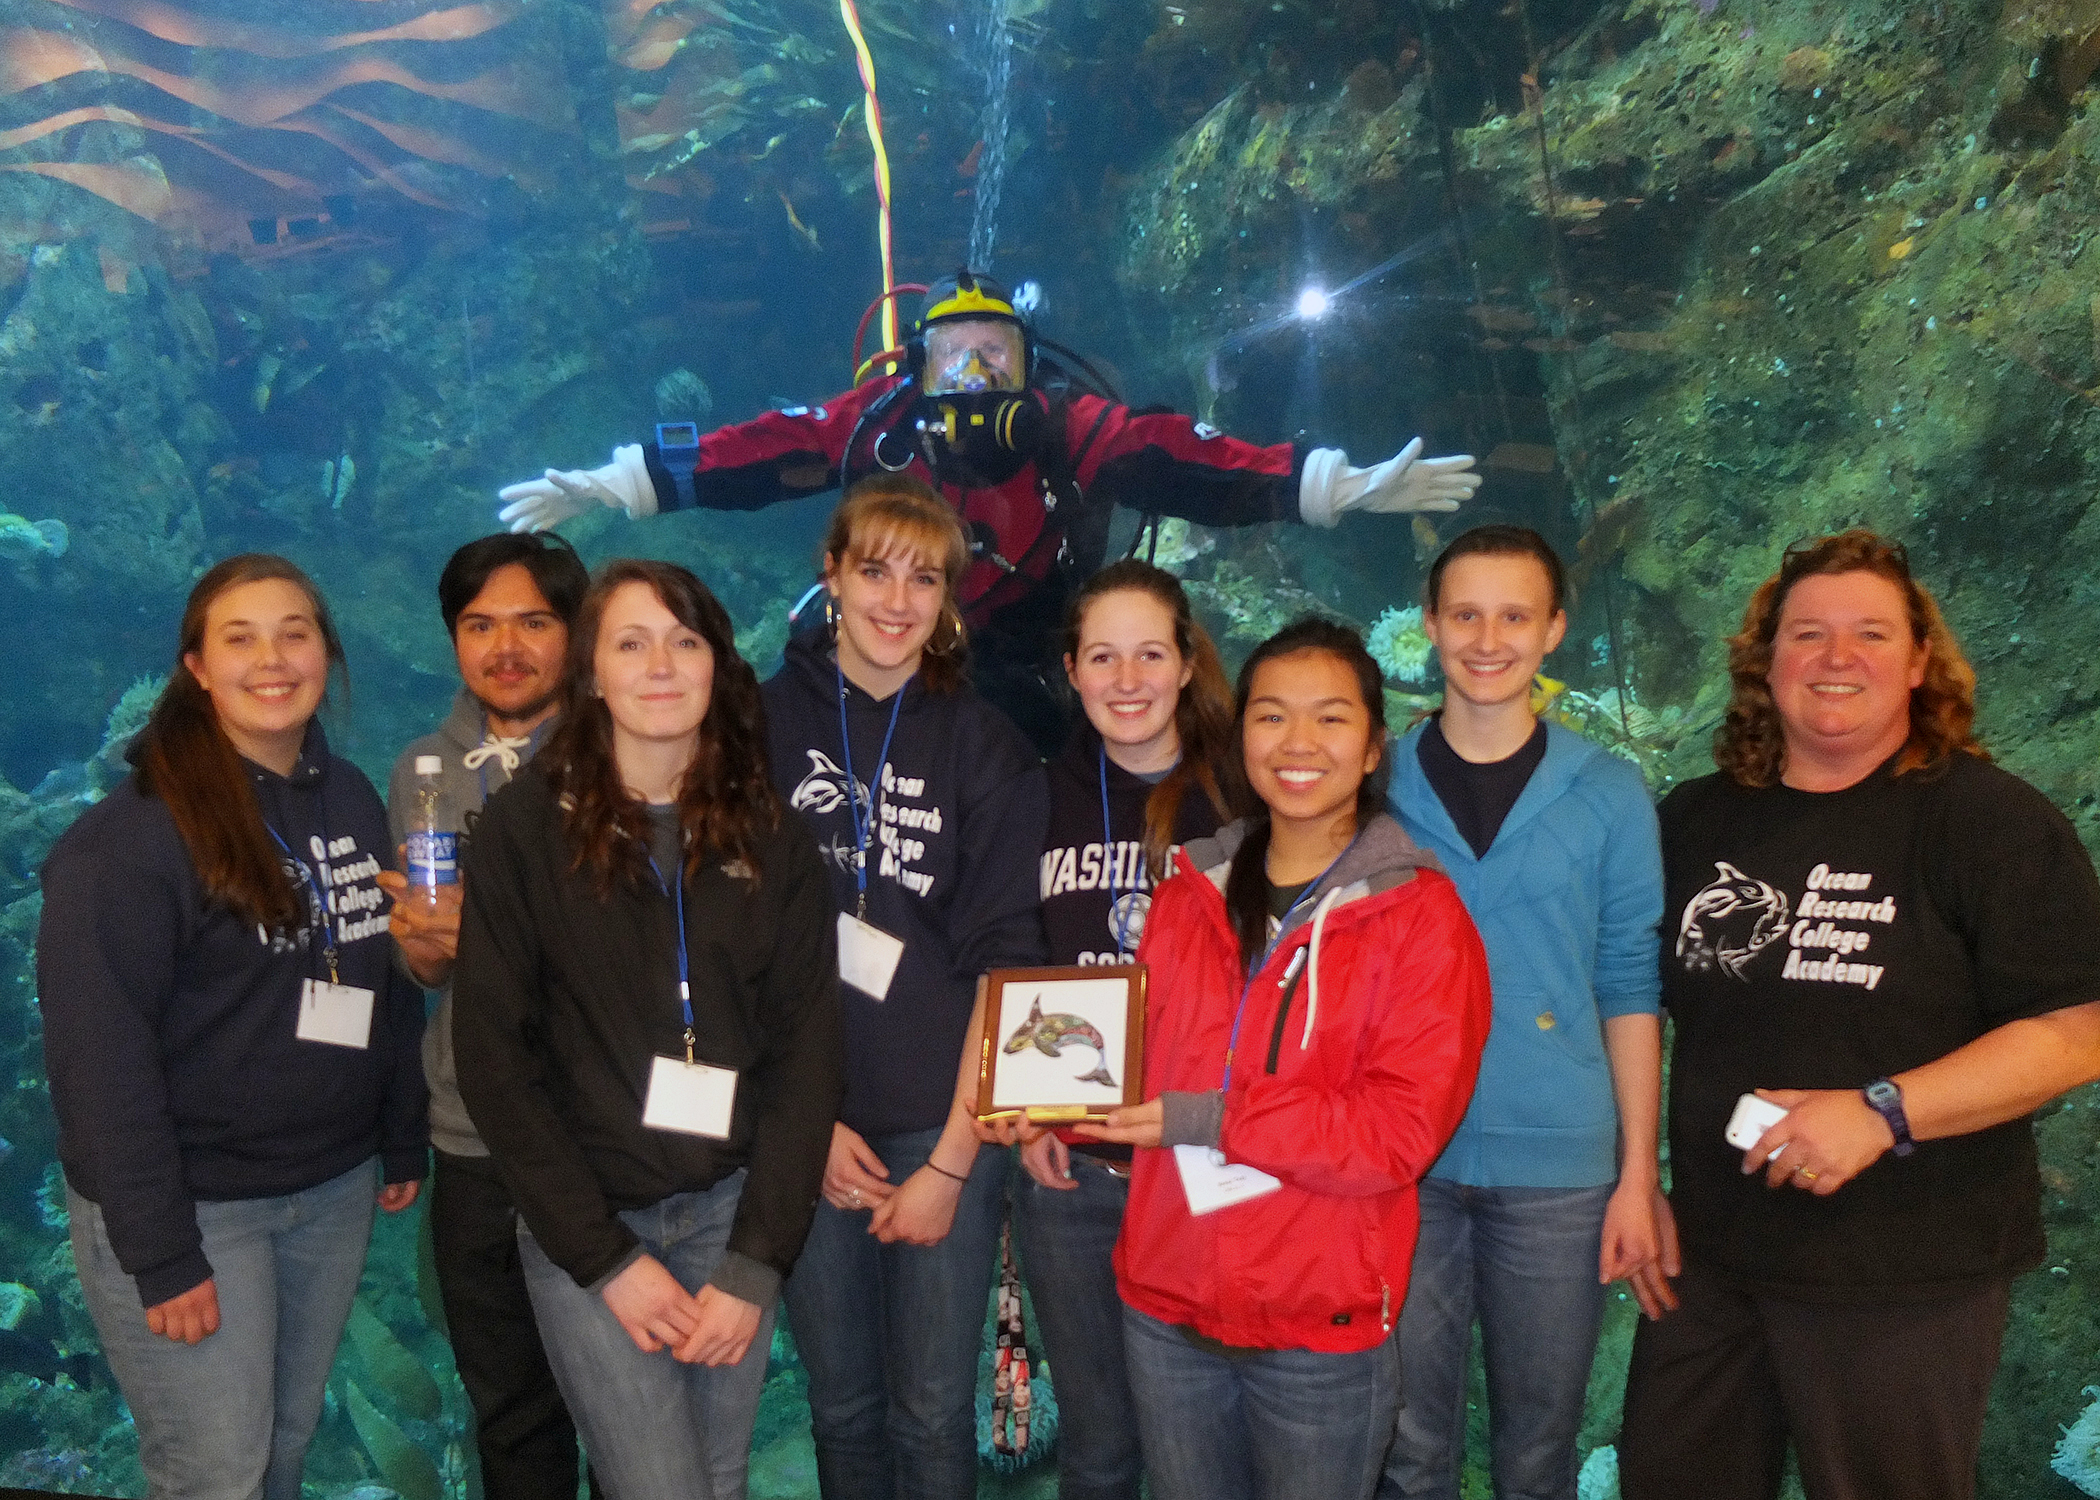 2014 champions ORCA team 'A' after the awards ceremony at the Seattle Aquarium.